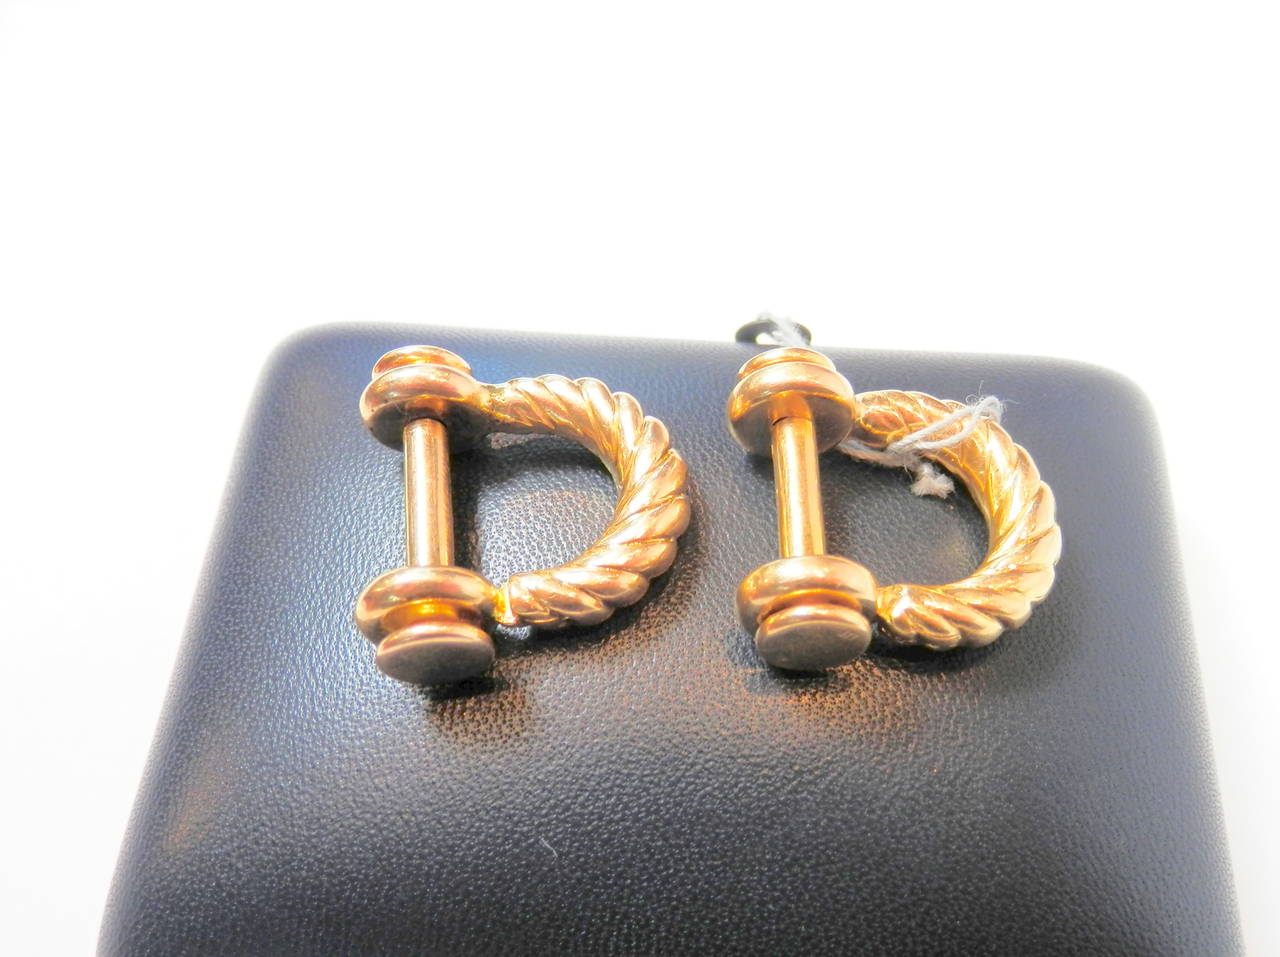 Contemporary French Gold shackle motif cufflinks